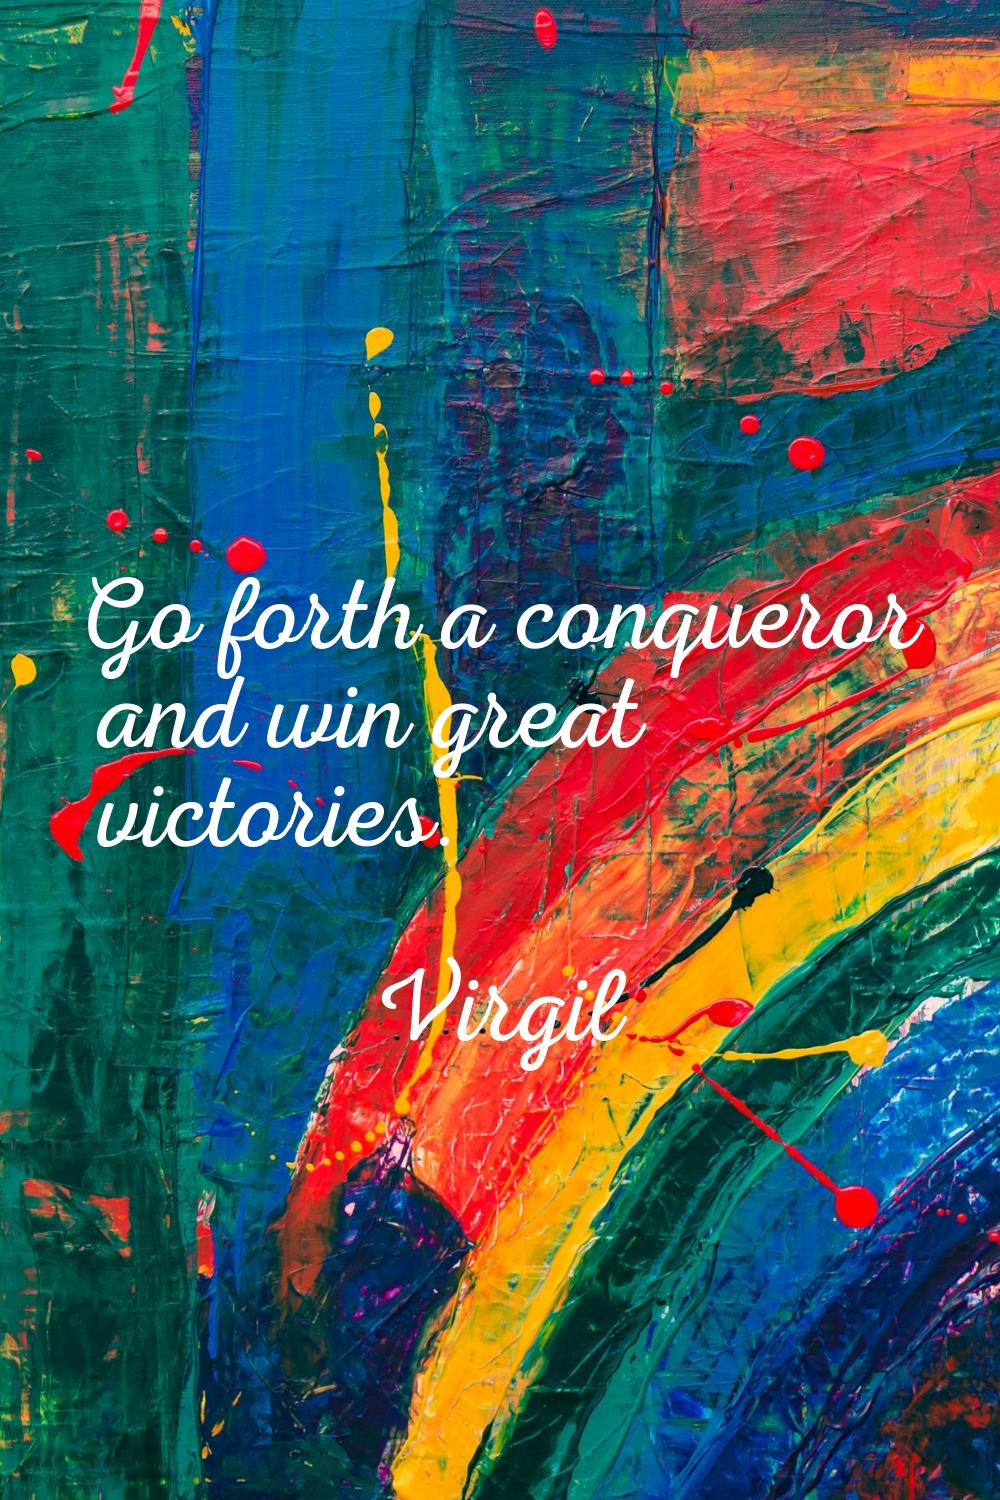 Go forth a conqueror and win great victories.